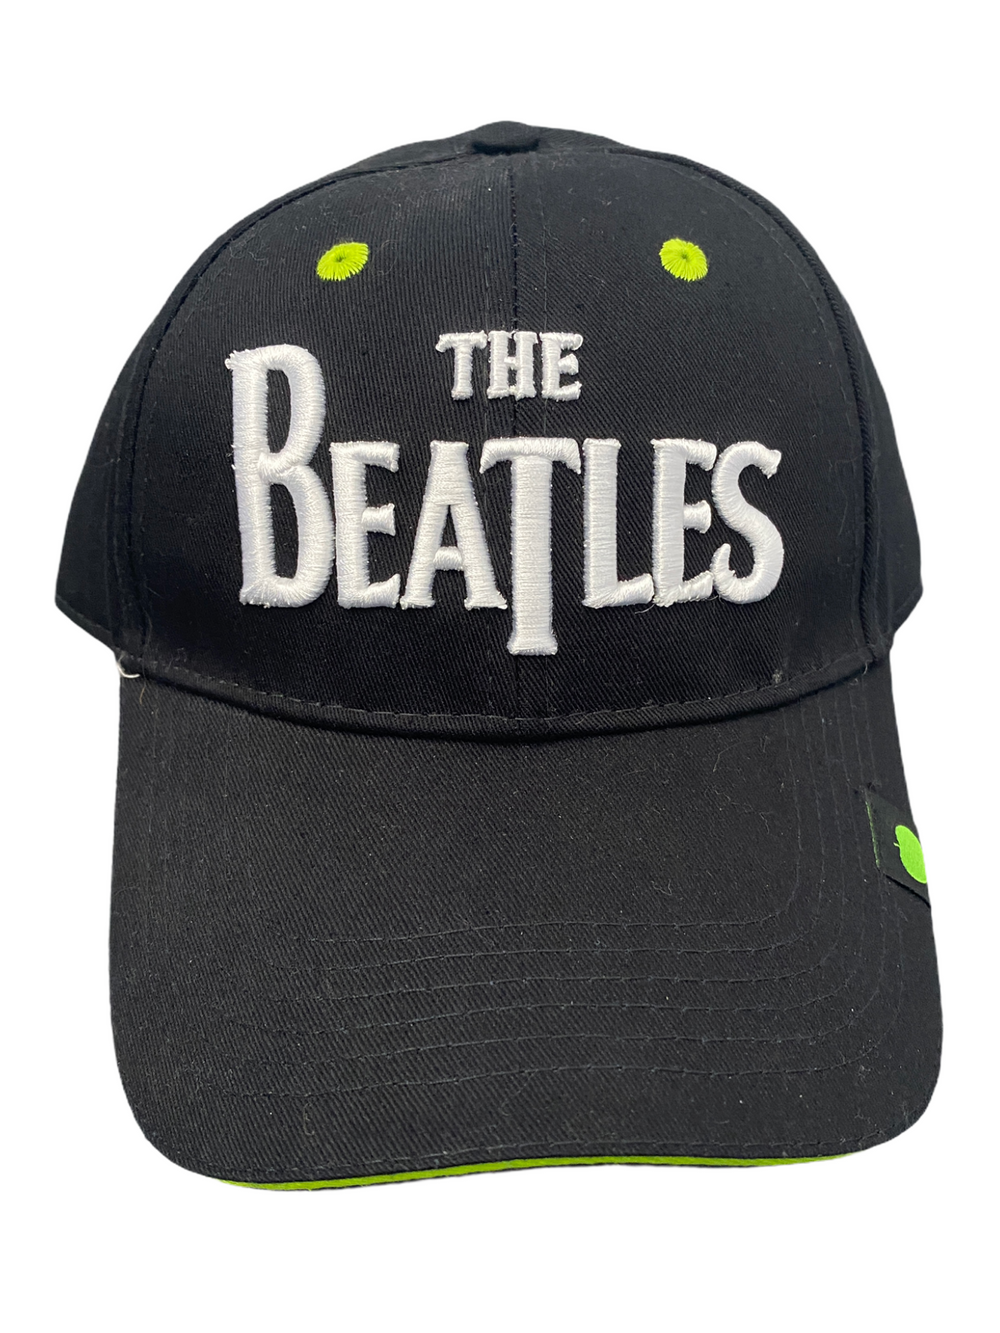 Beatles The Official Embroidered Peak Cap Adjustable Brand New Drop T